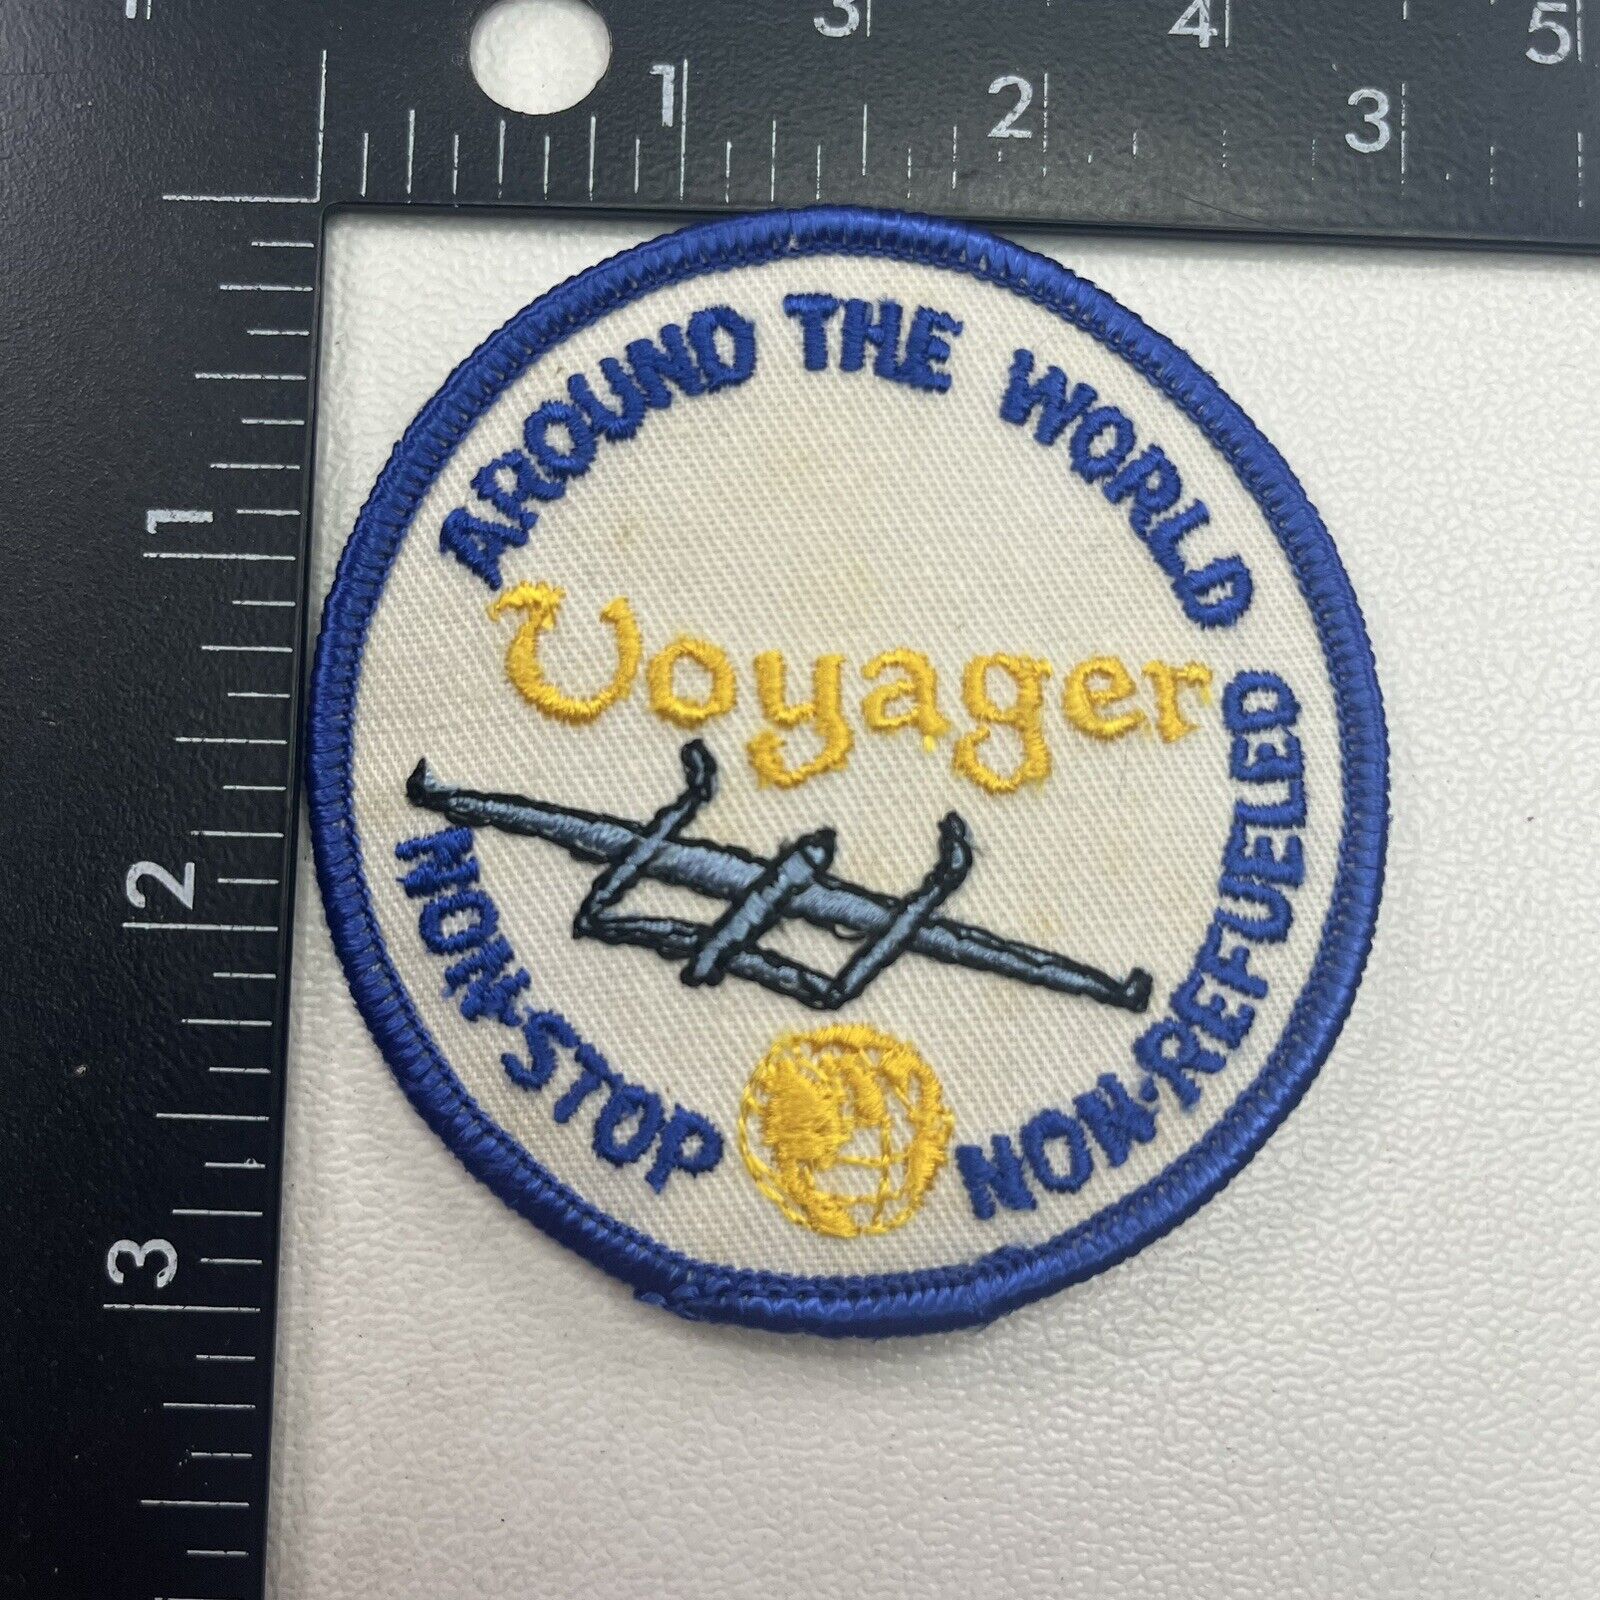 VTG VOYAGER AROUND THE WORLD NON-STOP NON-REFUELED Flight Airplane Patch 22SC